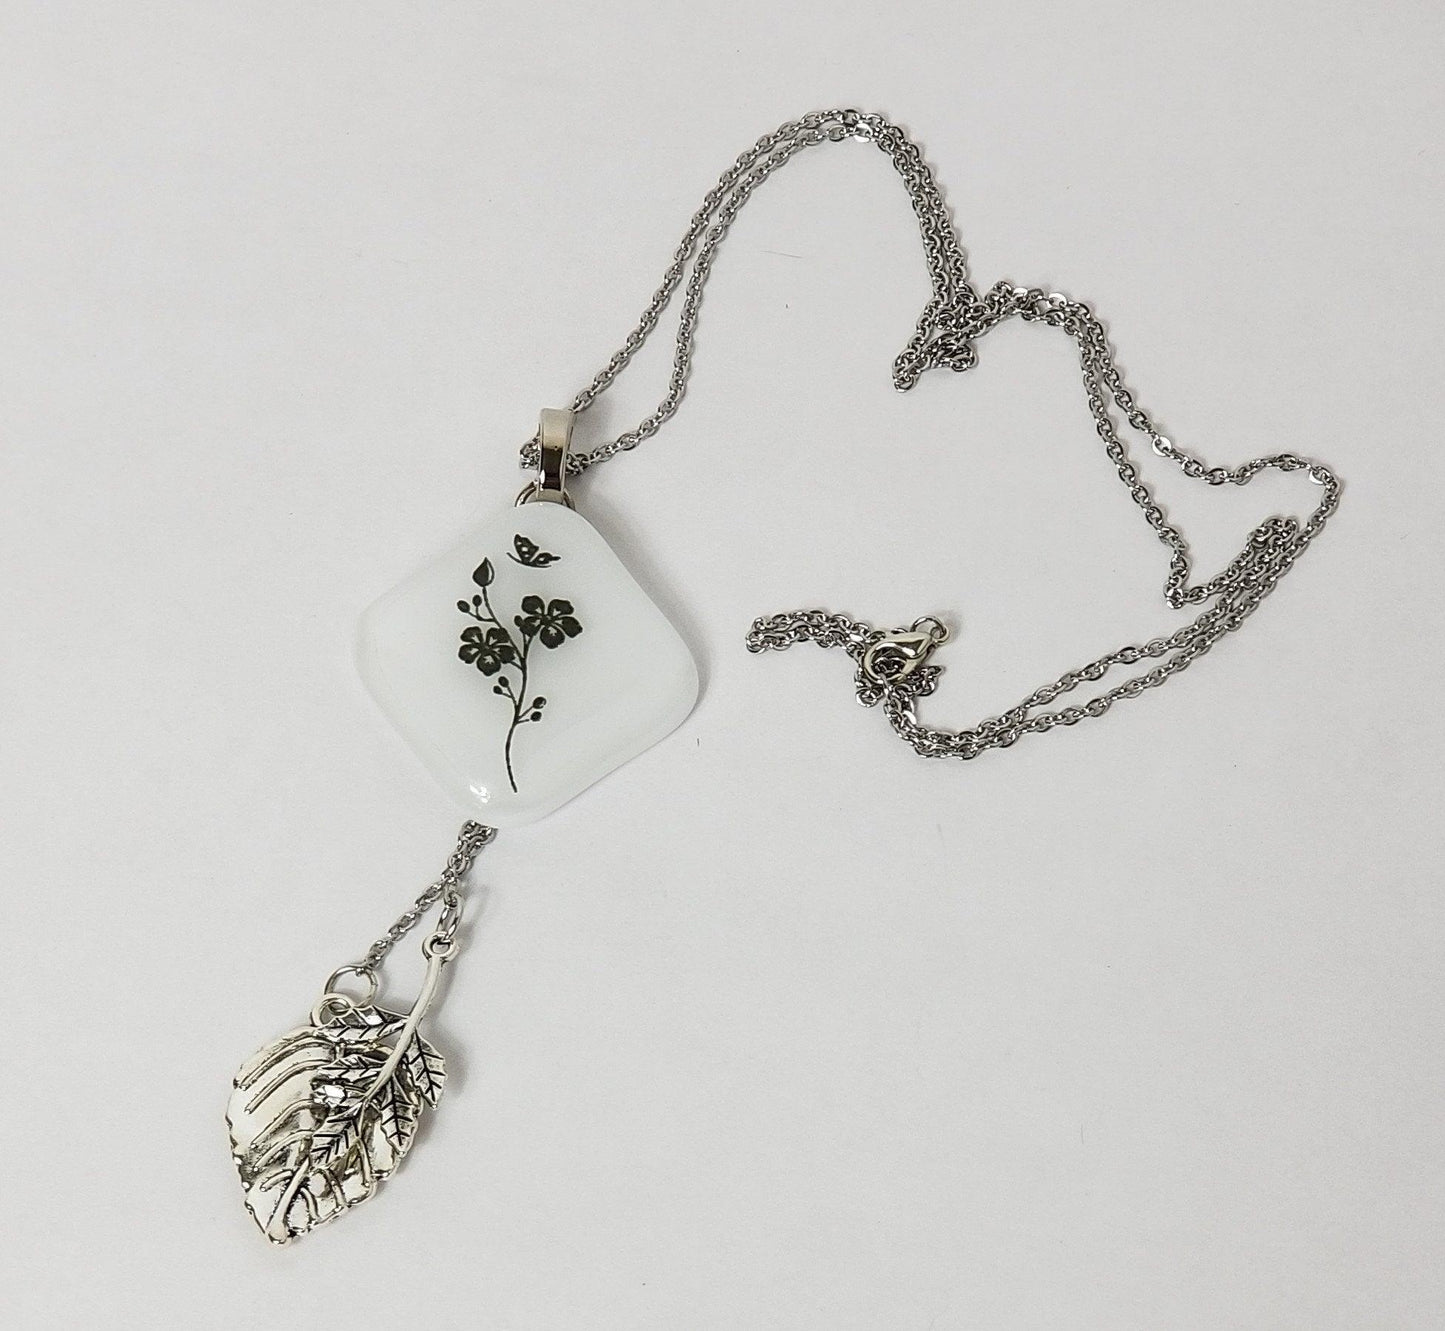 Flower Stem Nature Necklace, Fused Glass and Stainless steel chain and leaves from seeds glassworks